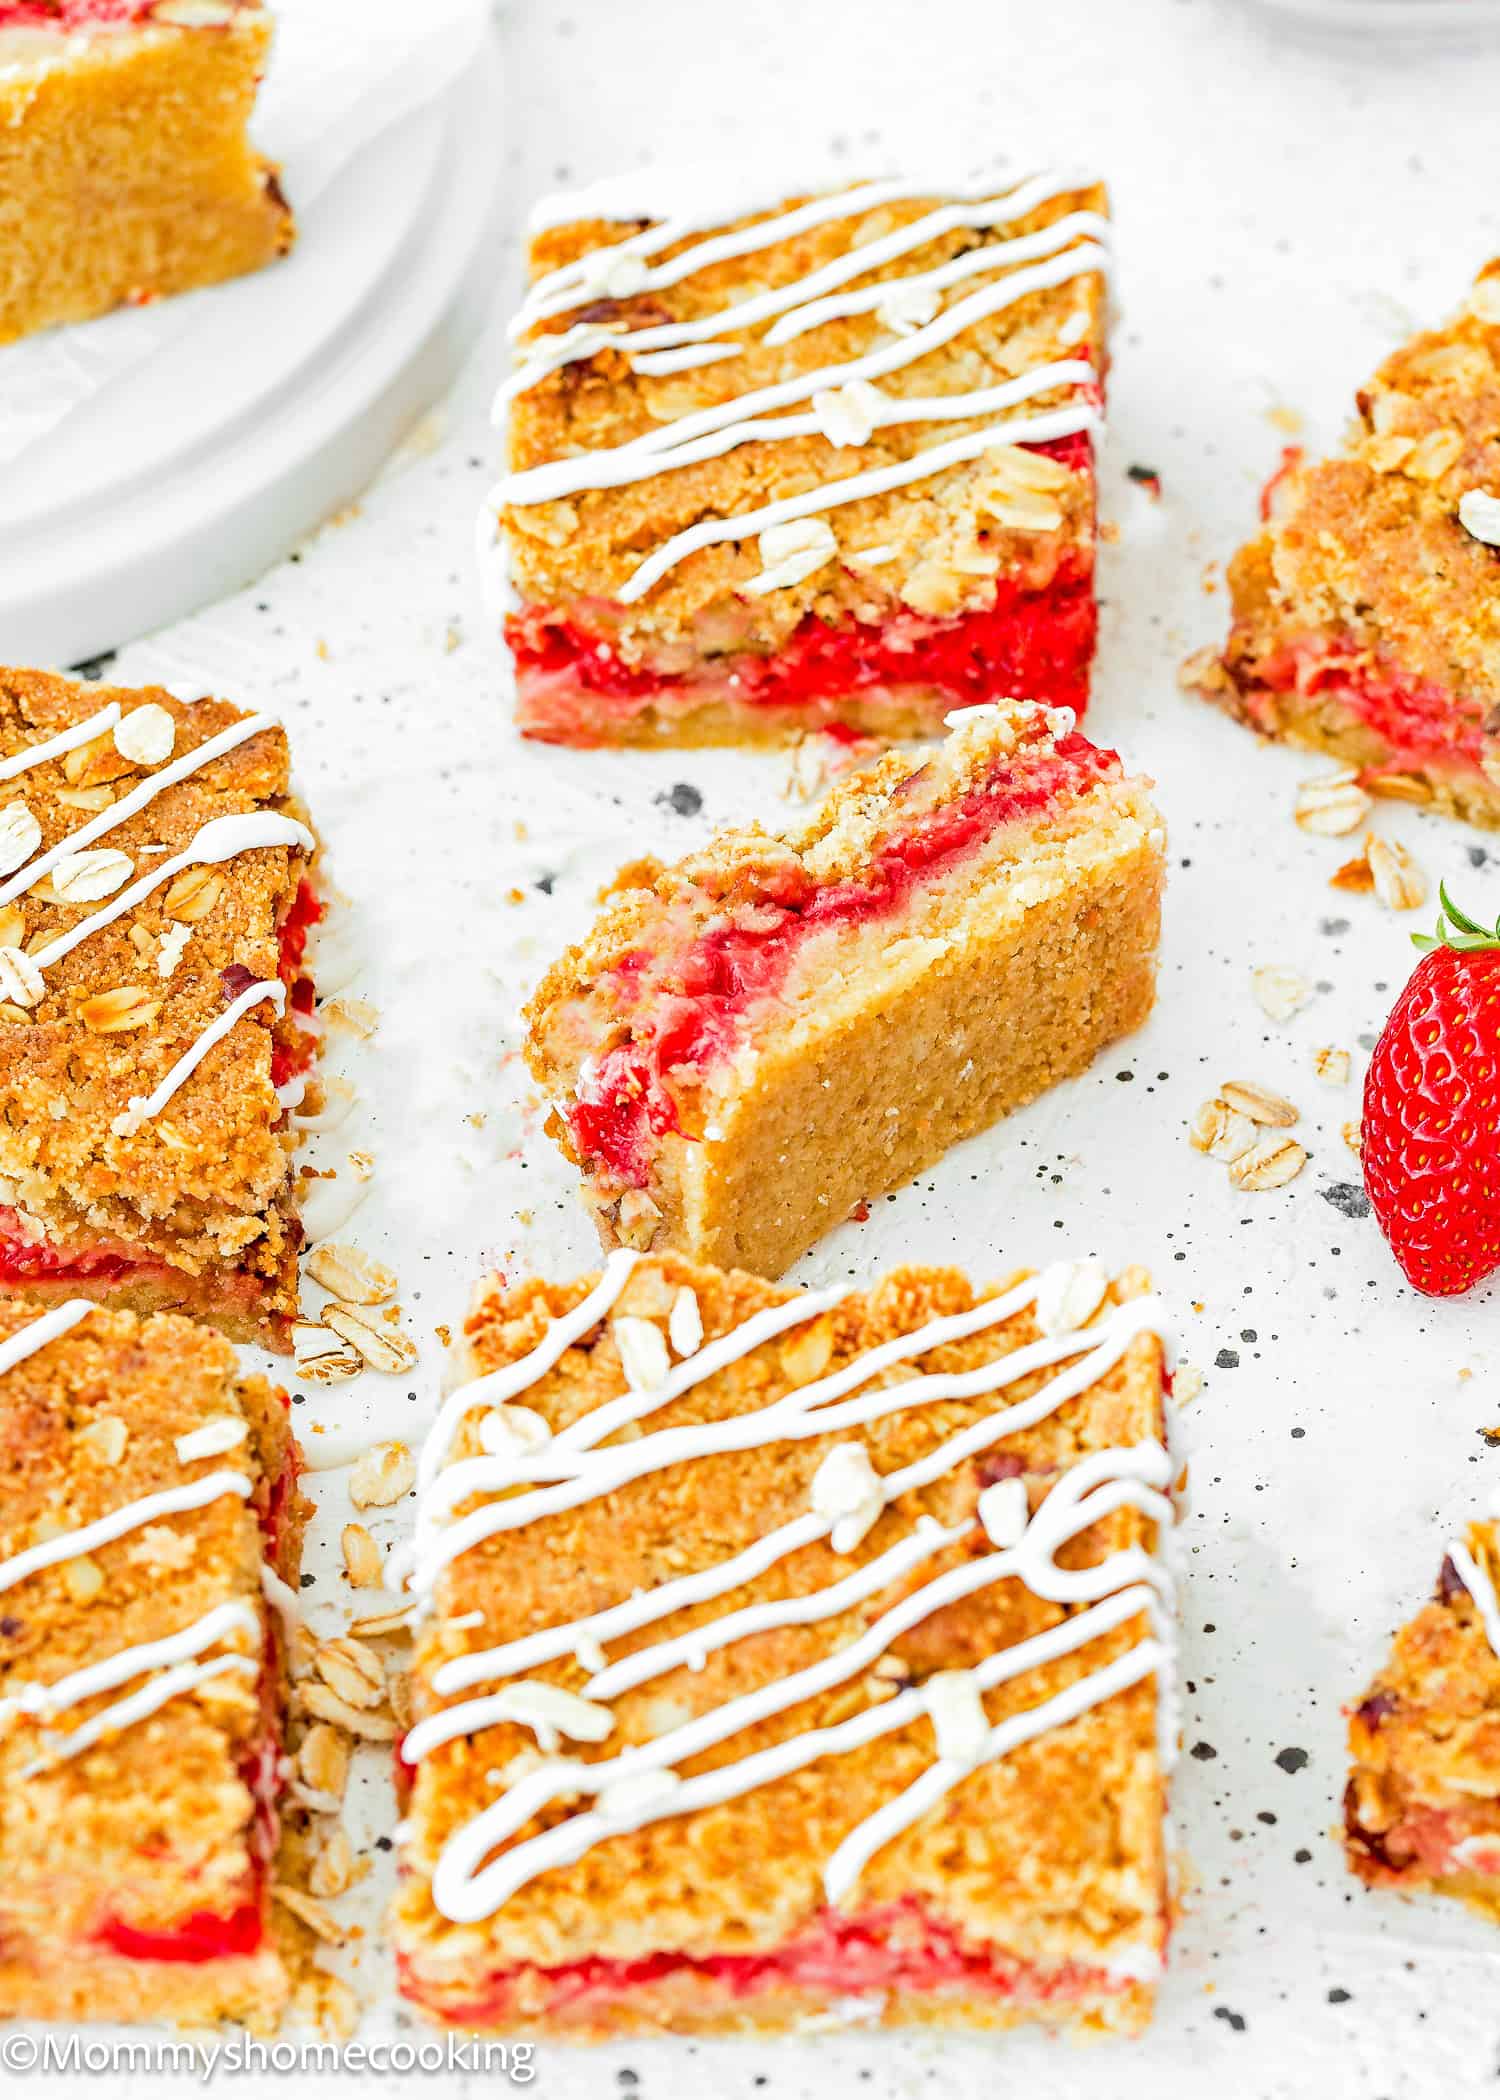 Egg-free Strawberry oat Bars over a white surface with fresh strawberries on the side.